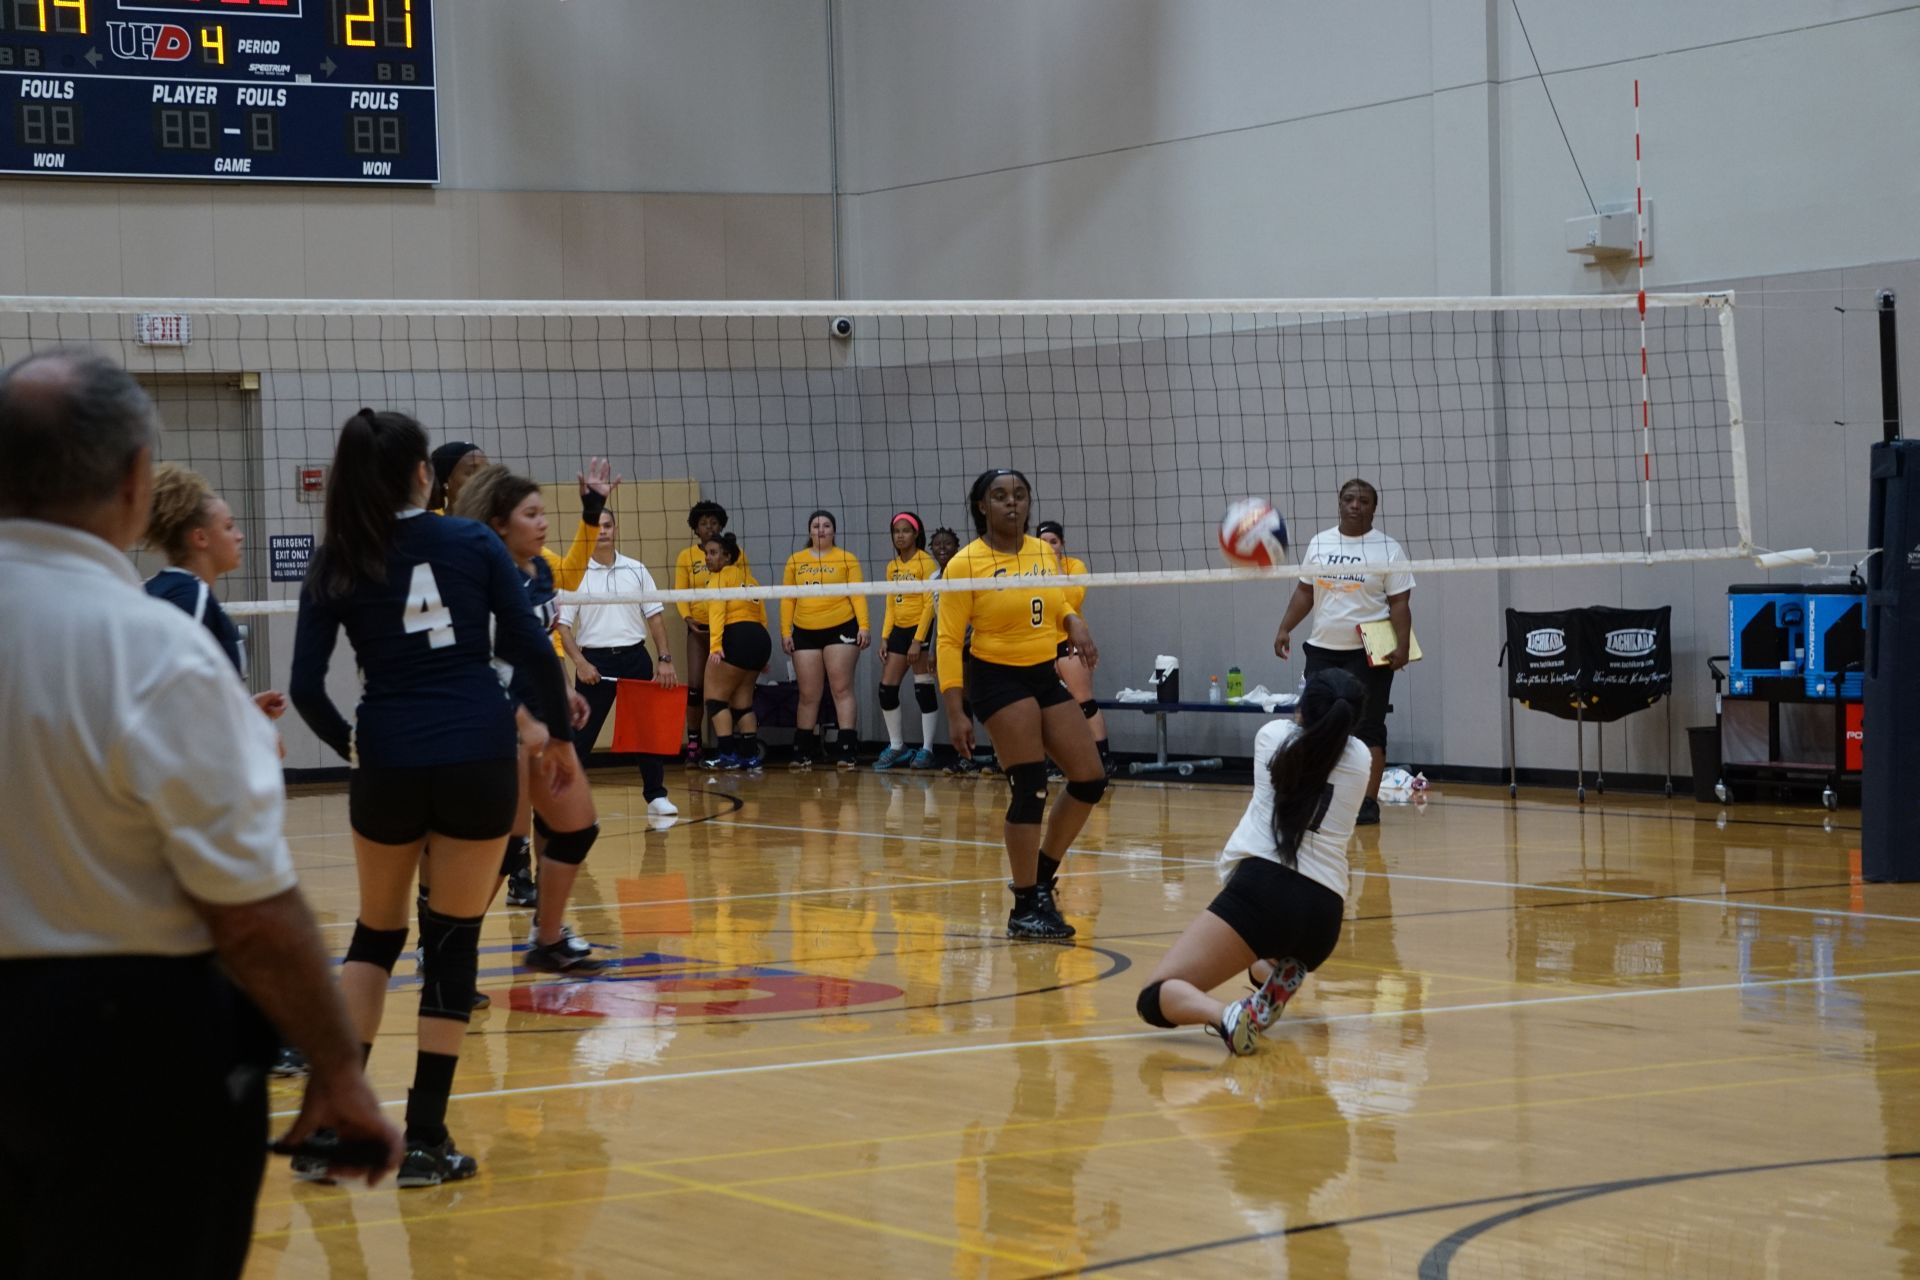 Photo of students from two different teams playing volleyball